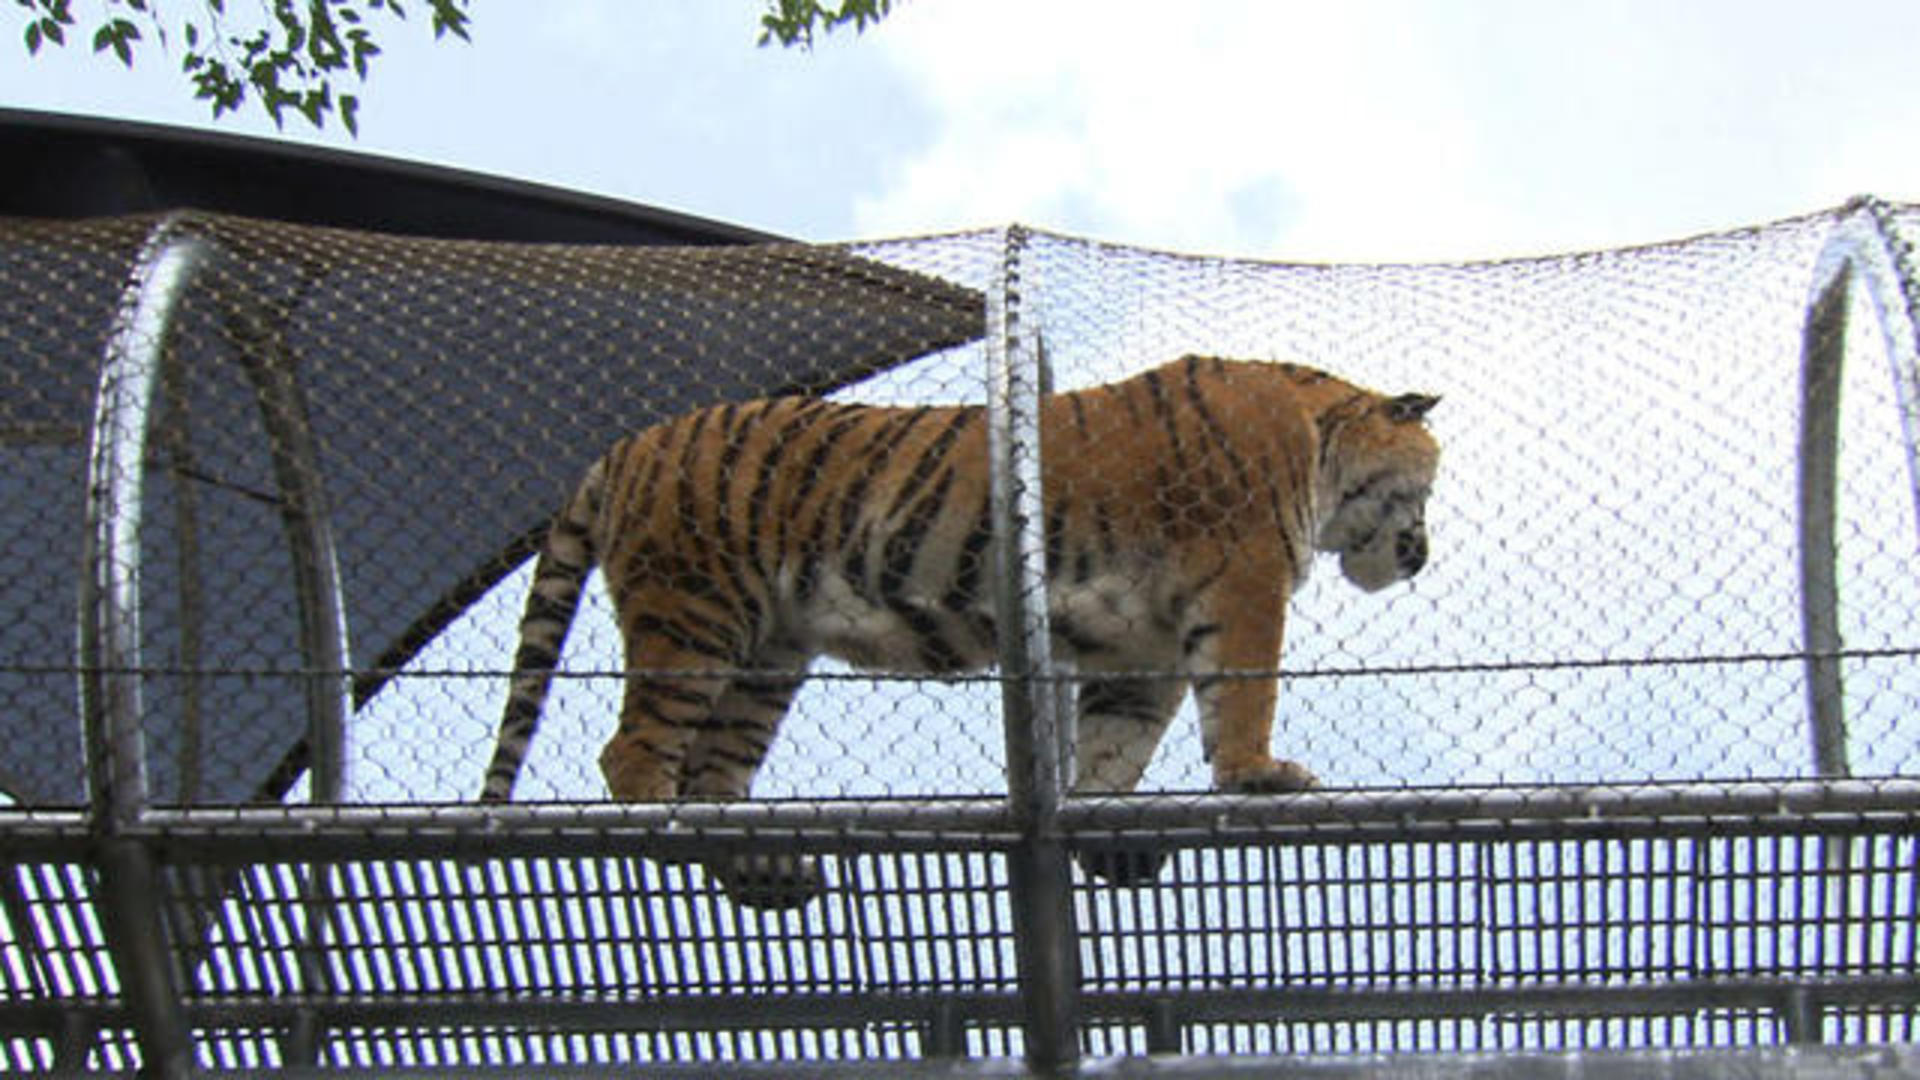 Zoo builds above-ground trails that allow animals to roam more freely - CBS  News